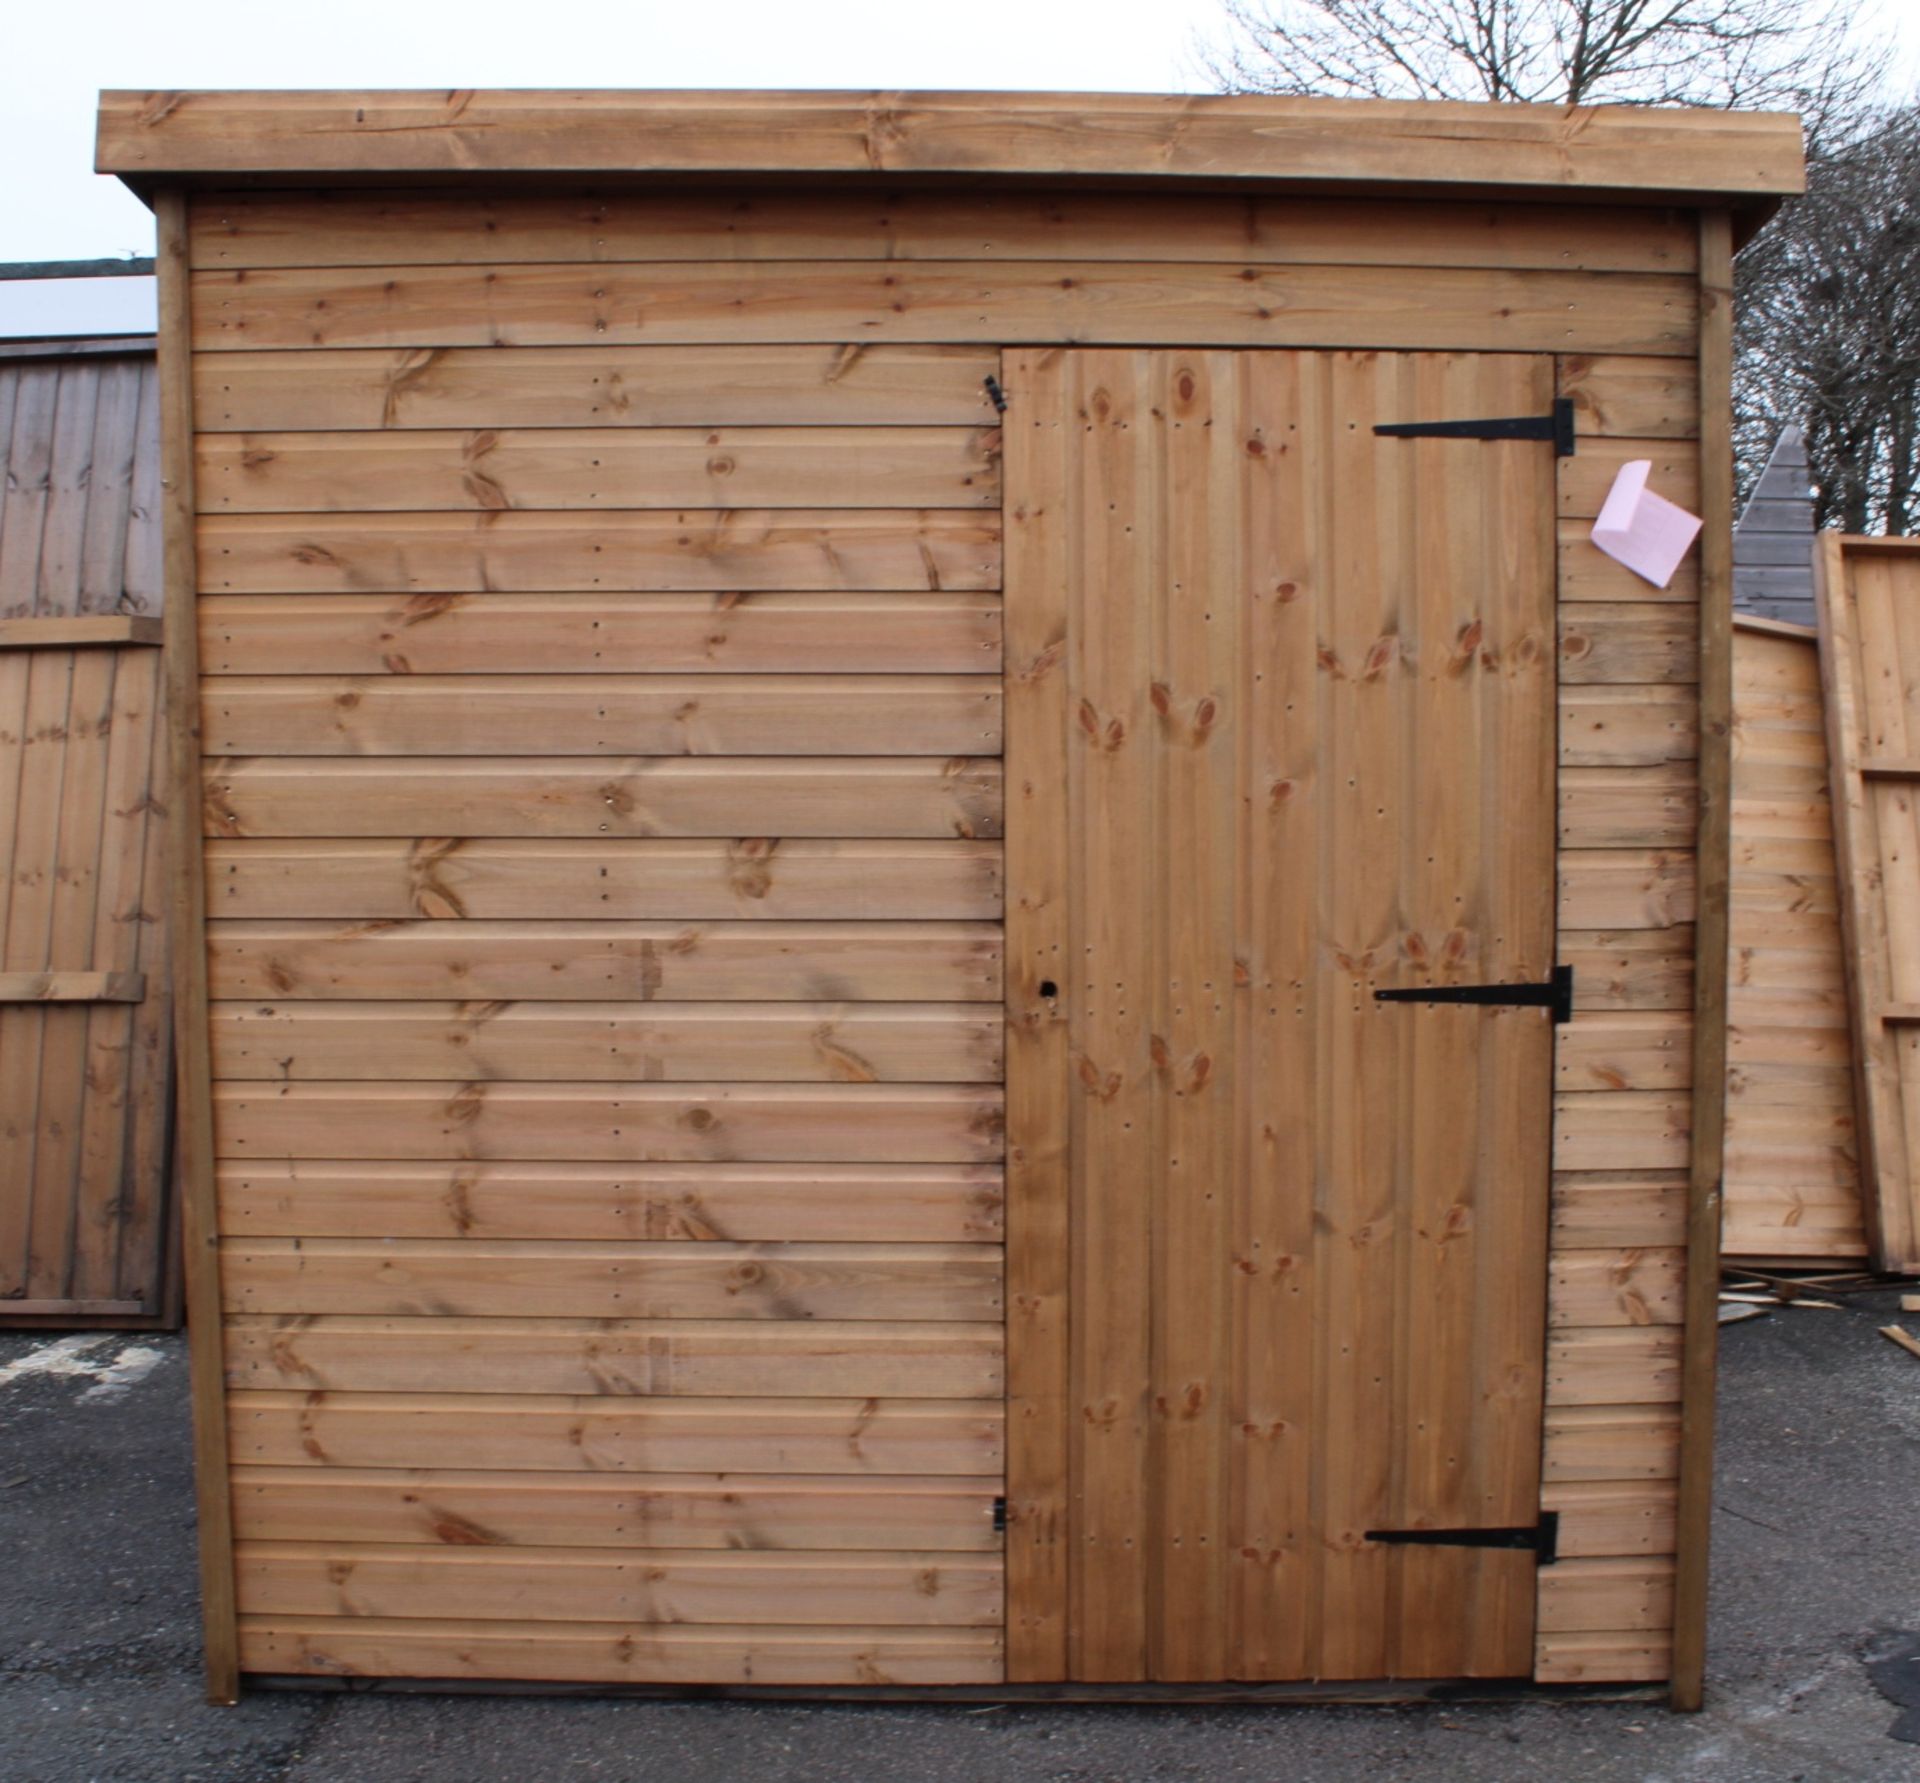 9/7 Ex-display 7x5 superior height pent shed, Standard 16mm Nominal Cladding RRP £ 960